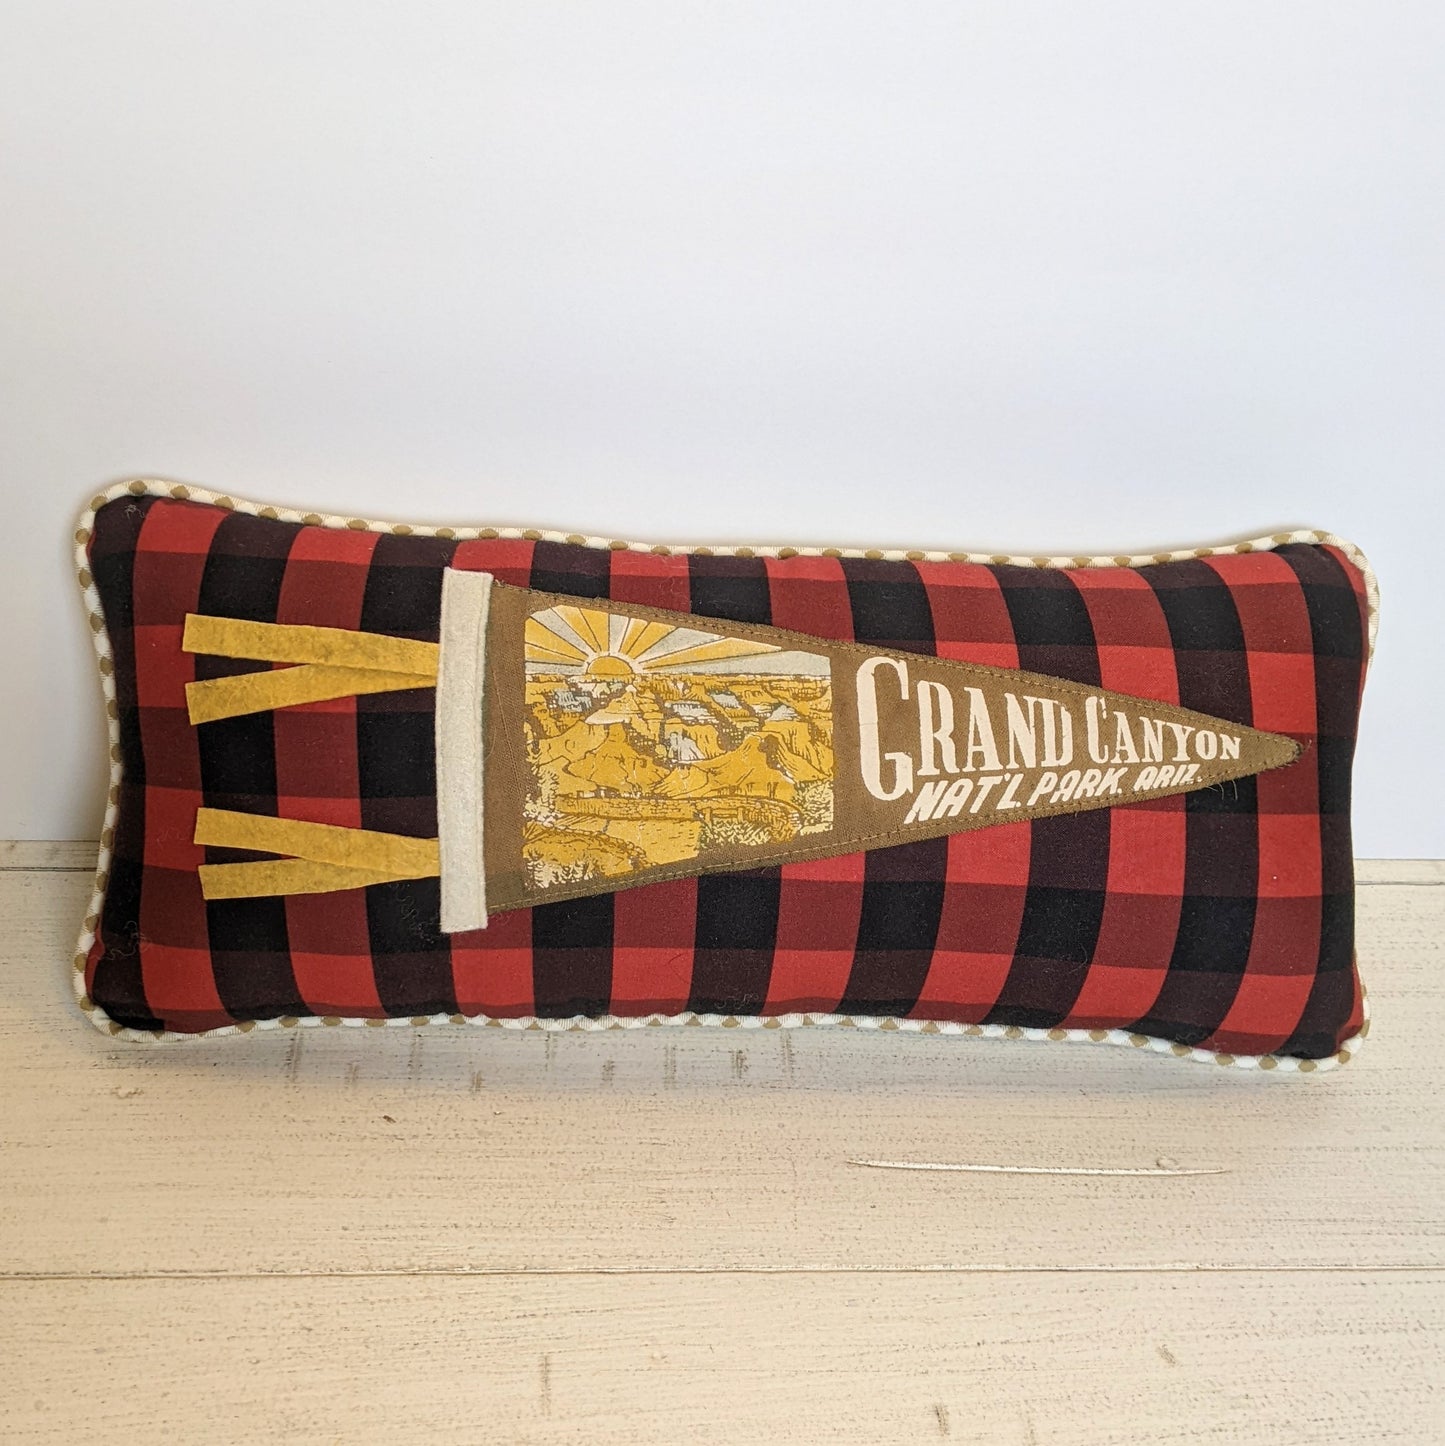 Grand Canyon National Park vintage pennant pillow